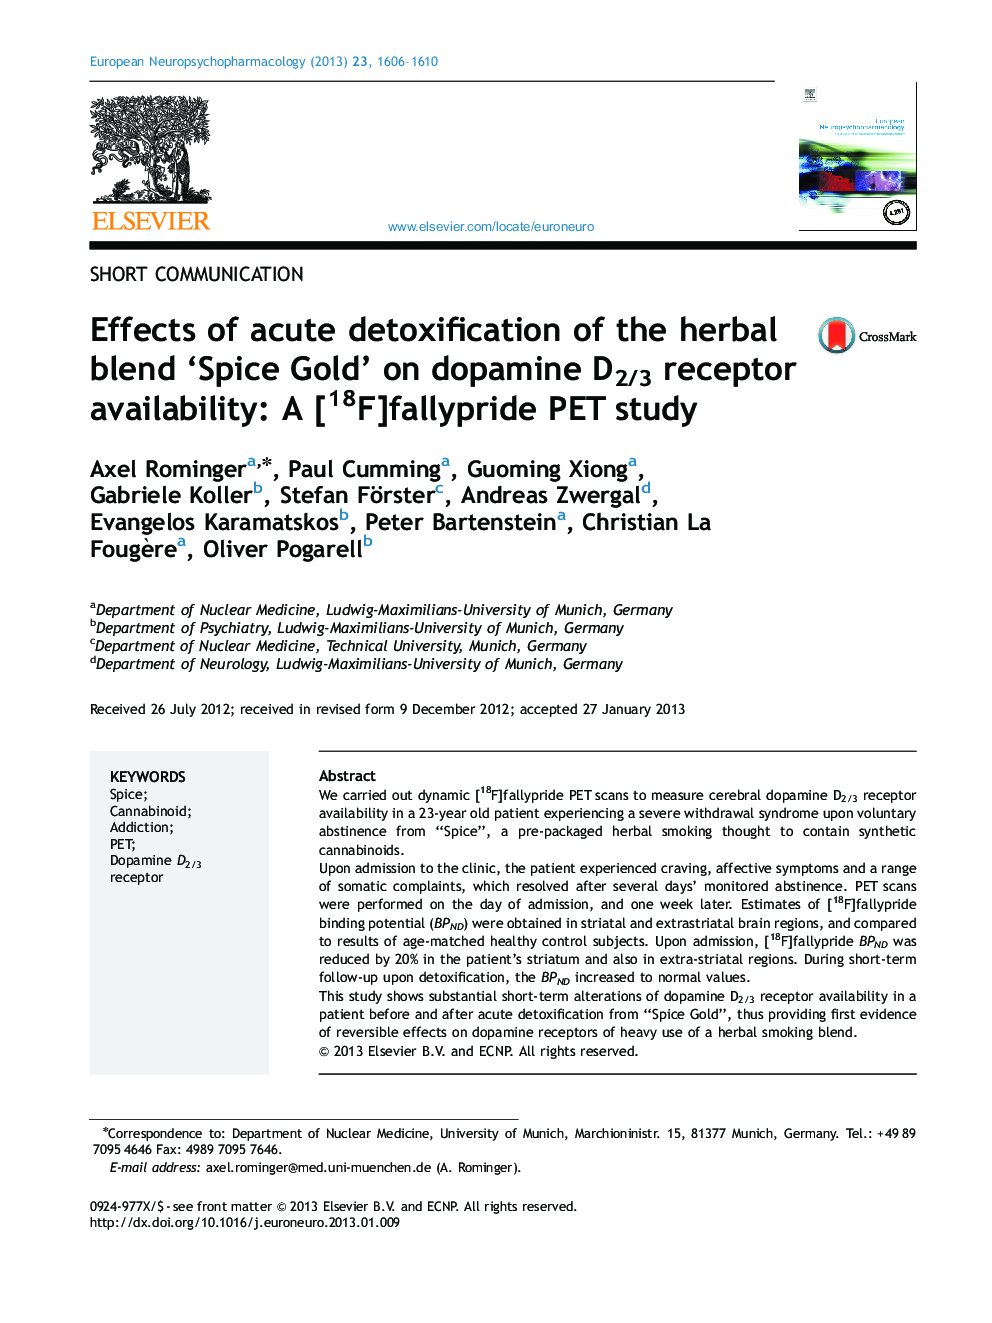 Effects of acute detoxification of the herbal blend 'Spice Gold' on dopamine D2/3 receptor availability: A [18F]fallypride PET study